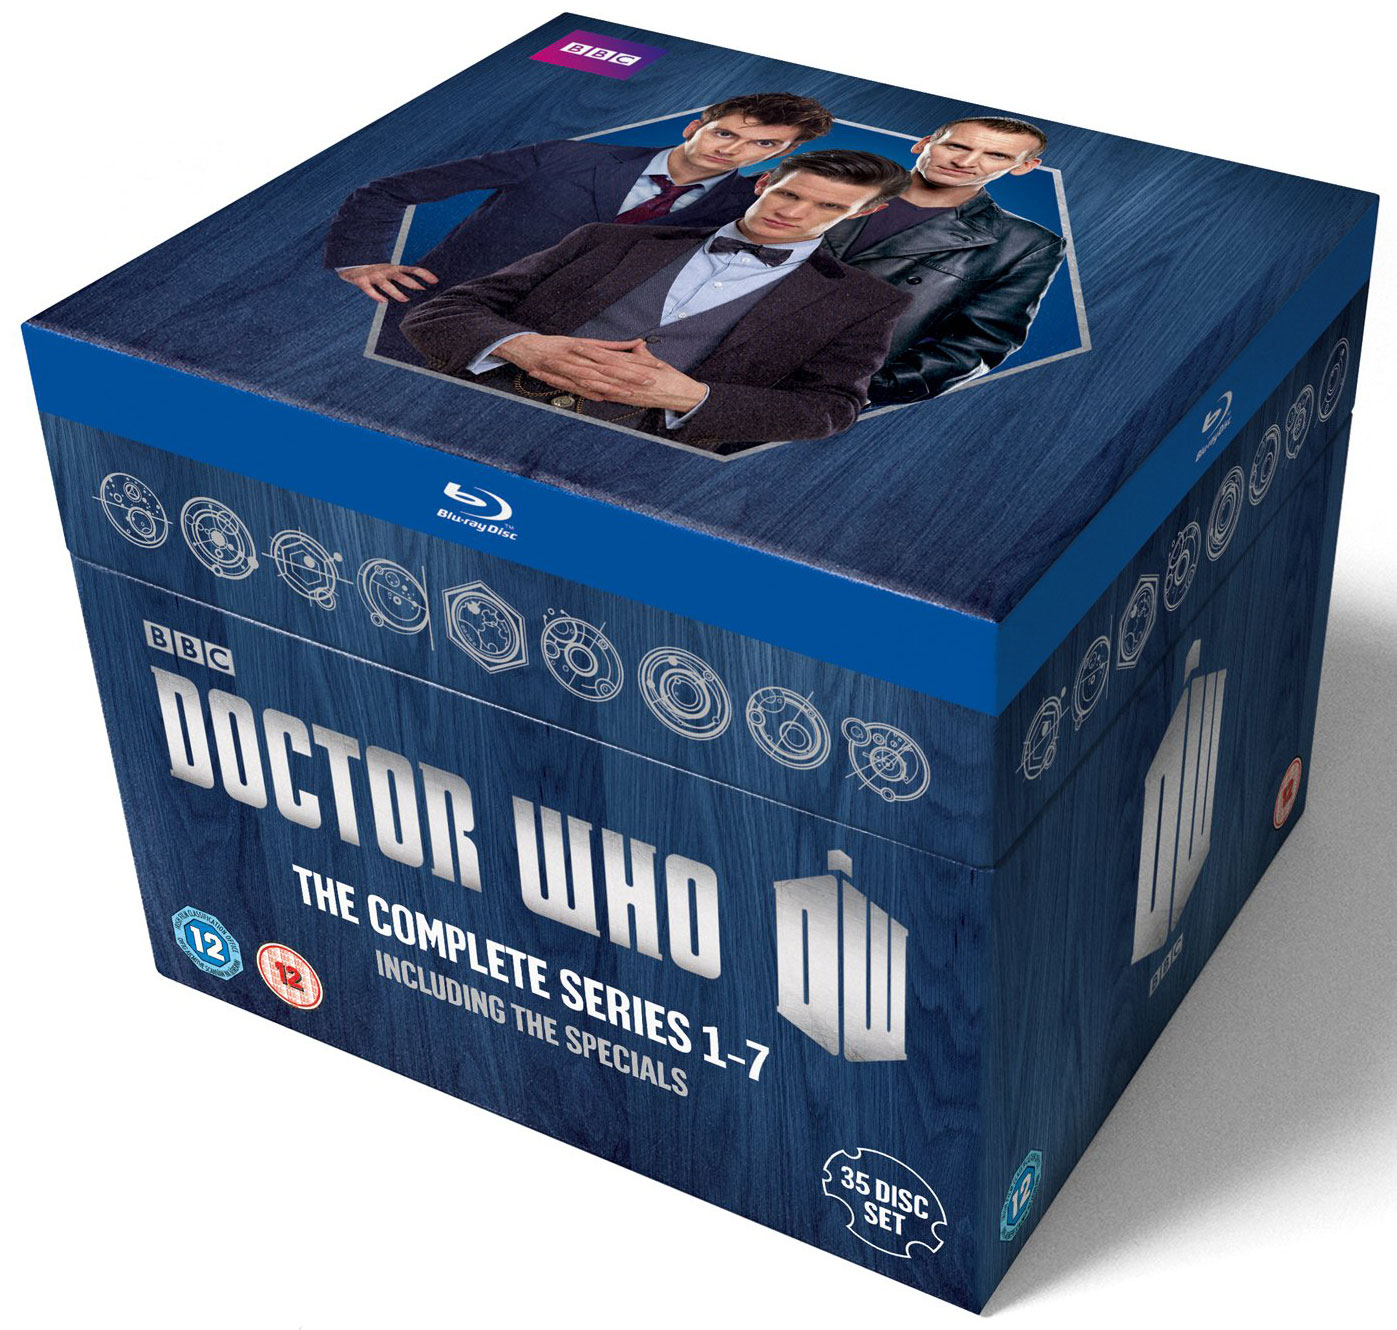 Building a Complete Doctor Who DVD Collection – UK Based Online Retailers